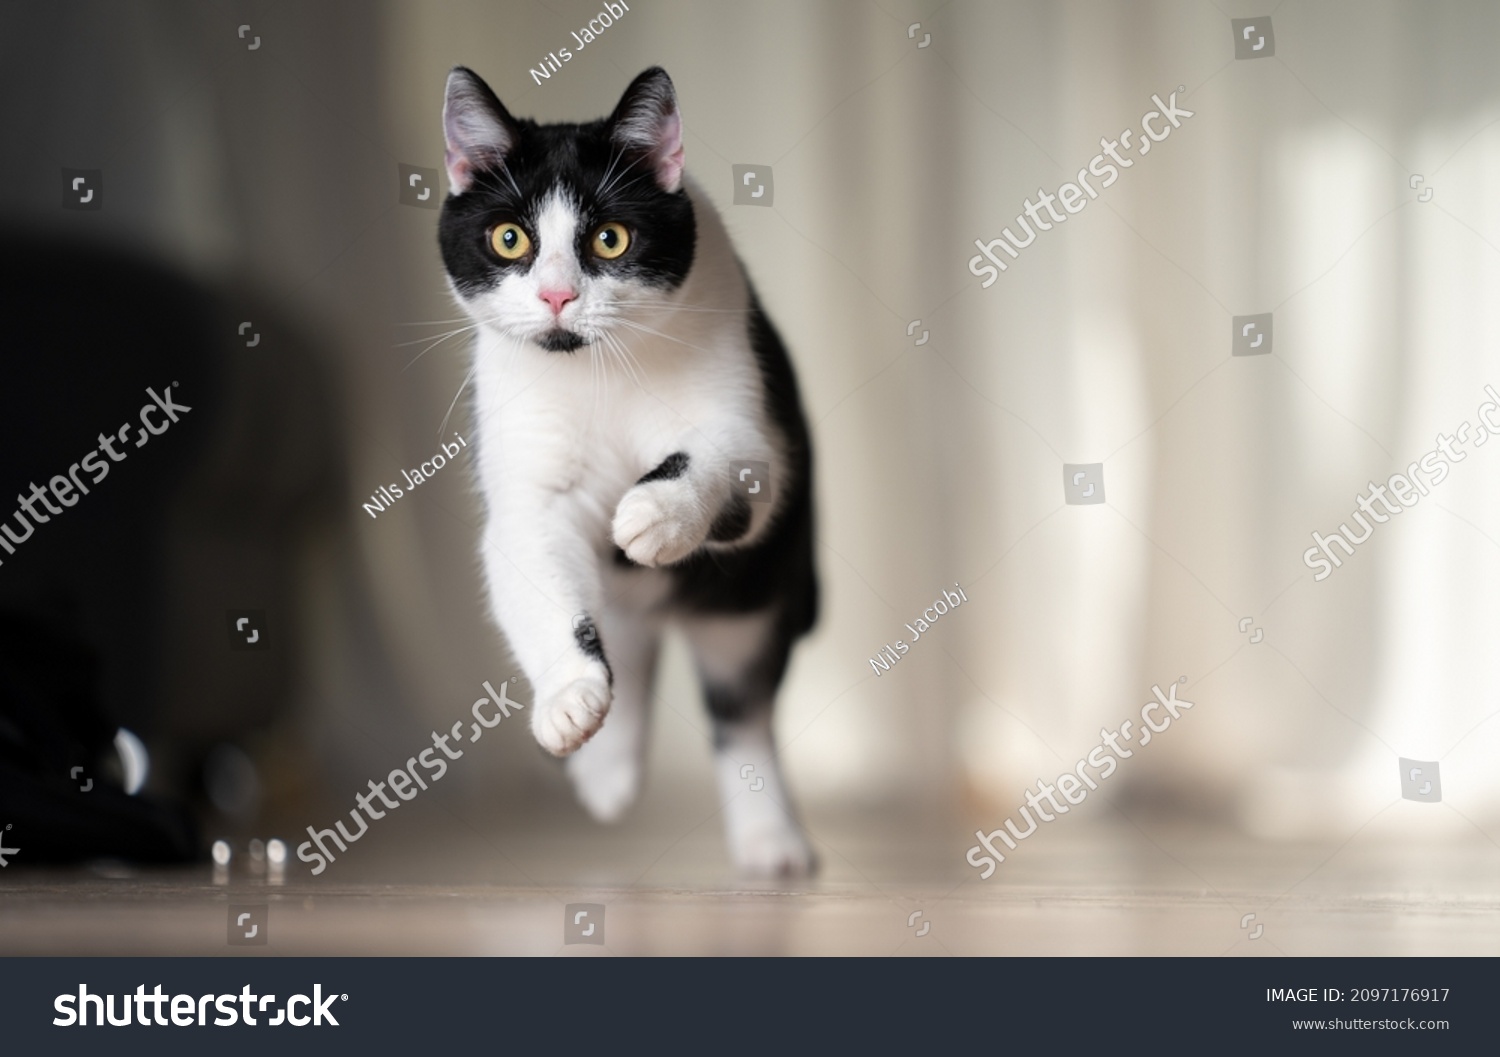 playful black and white cat running indoors at high speed with copy space #2097176917